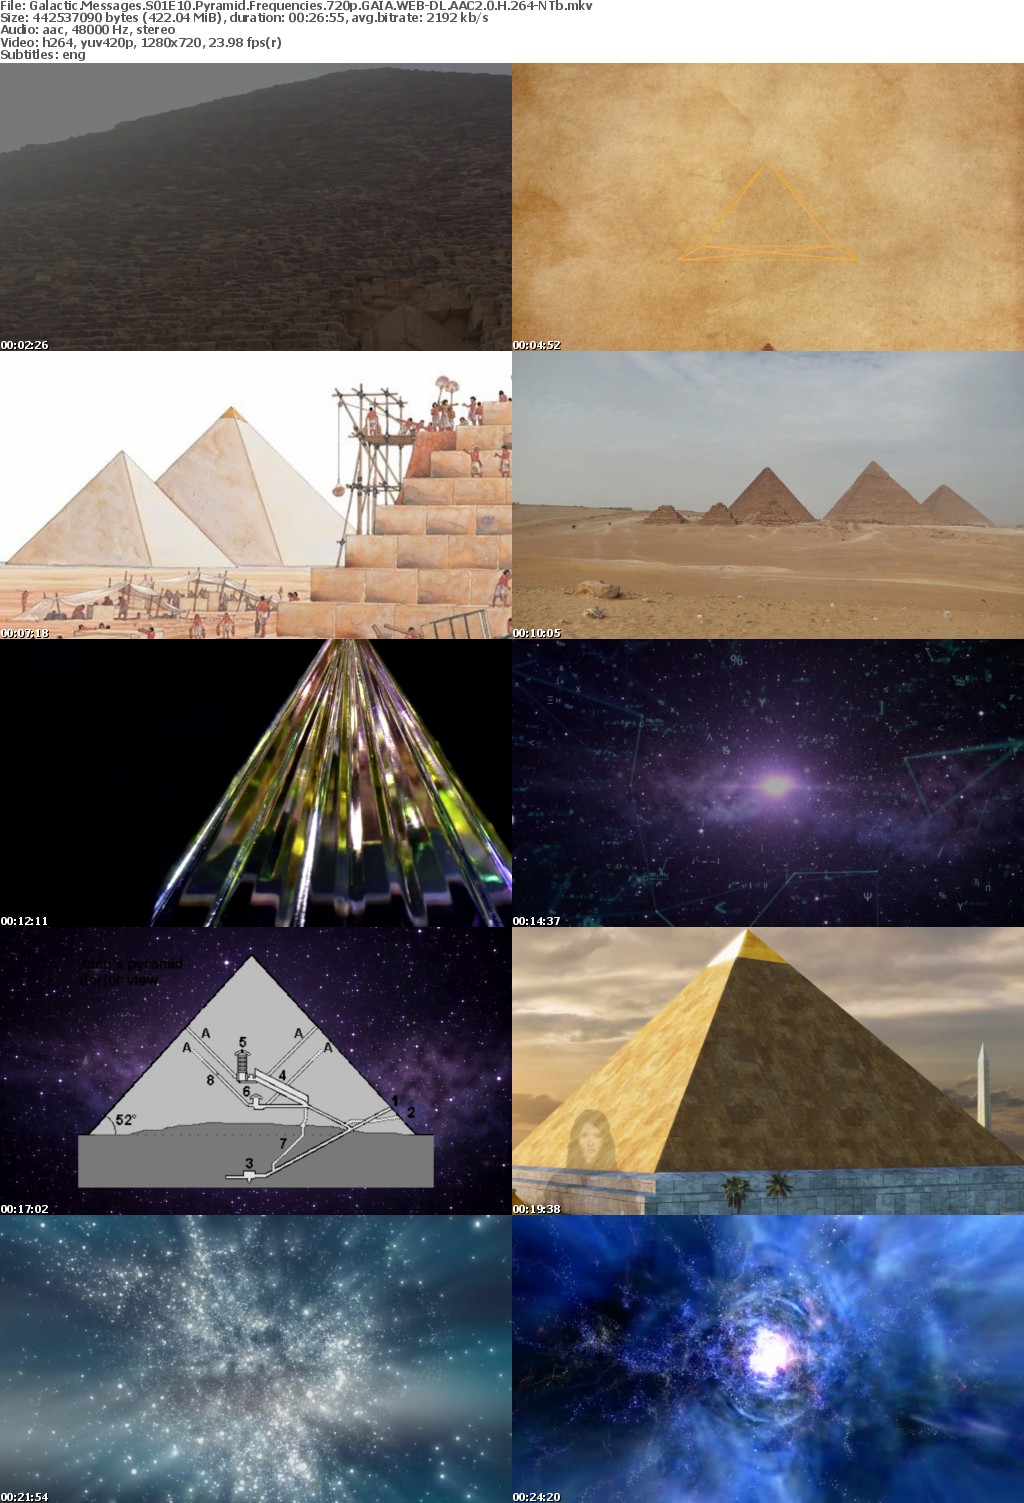 Galactic Messages S01E10 Pyramid Frequencies 720p GAIA WEB-DL AAC2 0 H 264-NTb